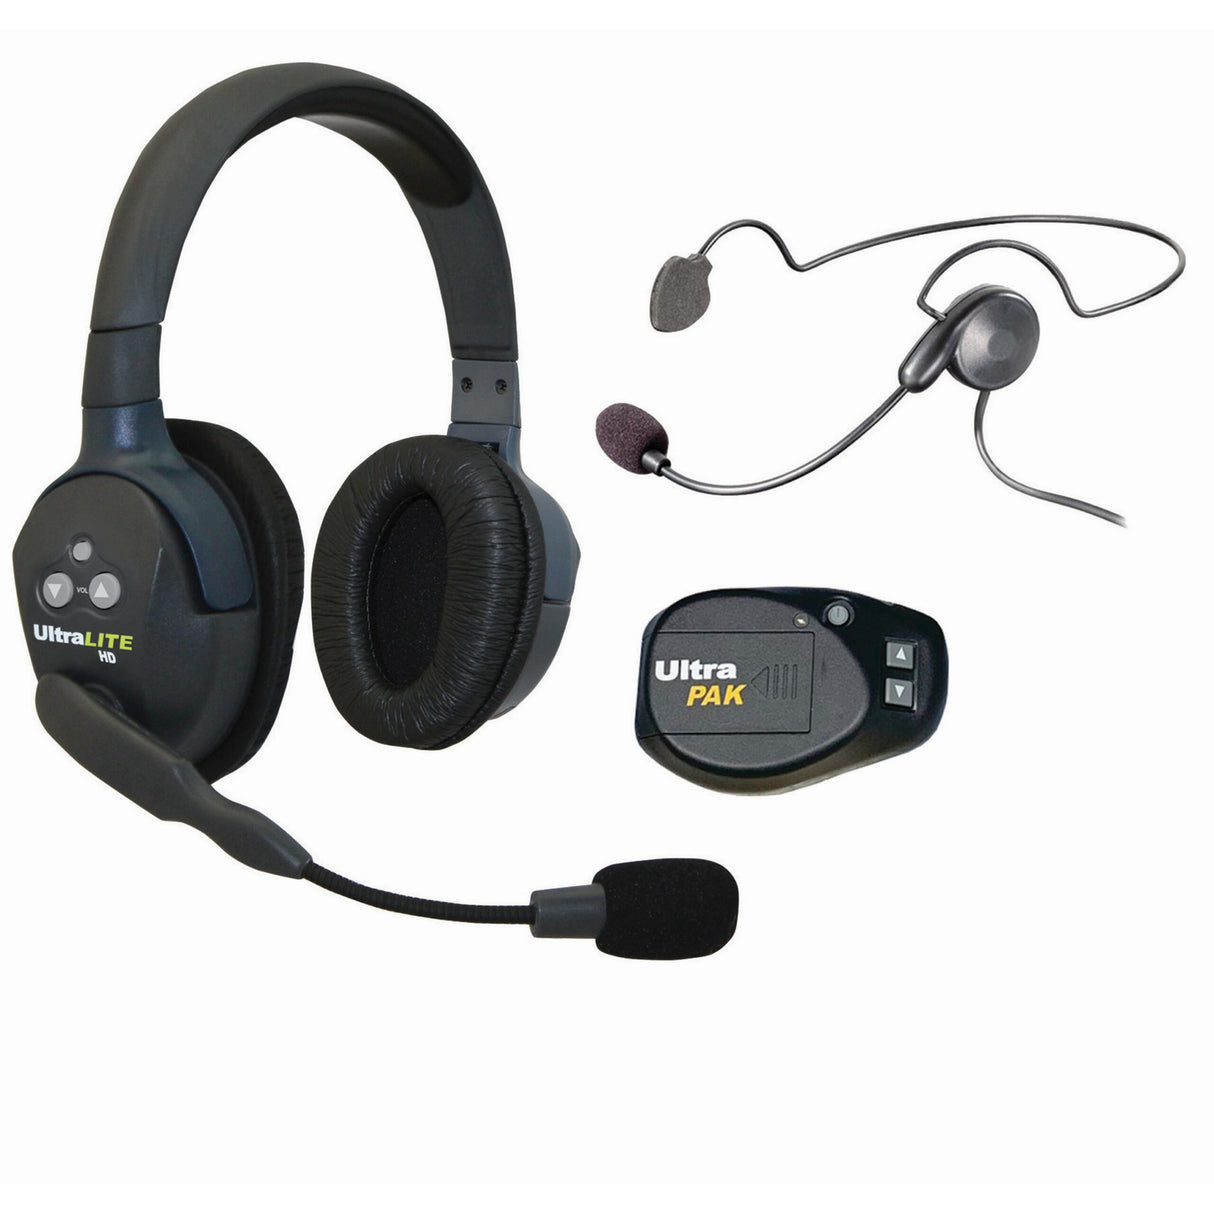 Eartec DMCYB3 1 Double MAIN UltraLITE and 2 Cyber/UltraPAK Headsets